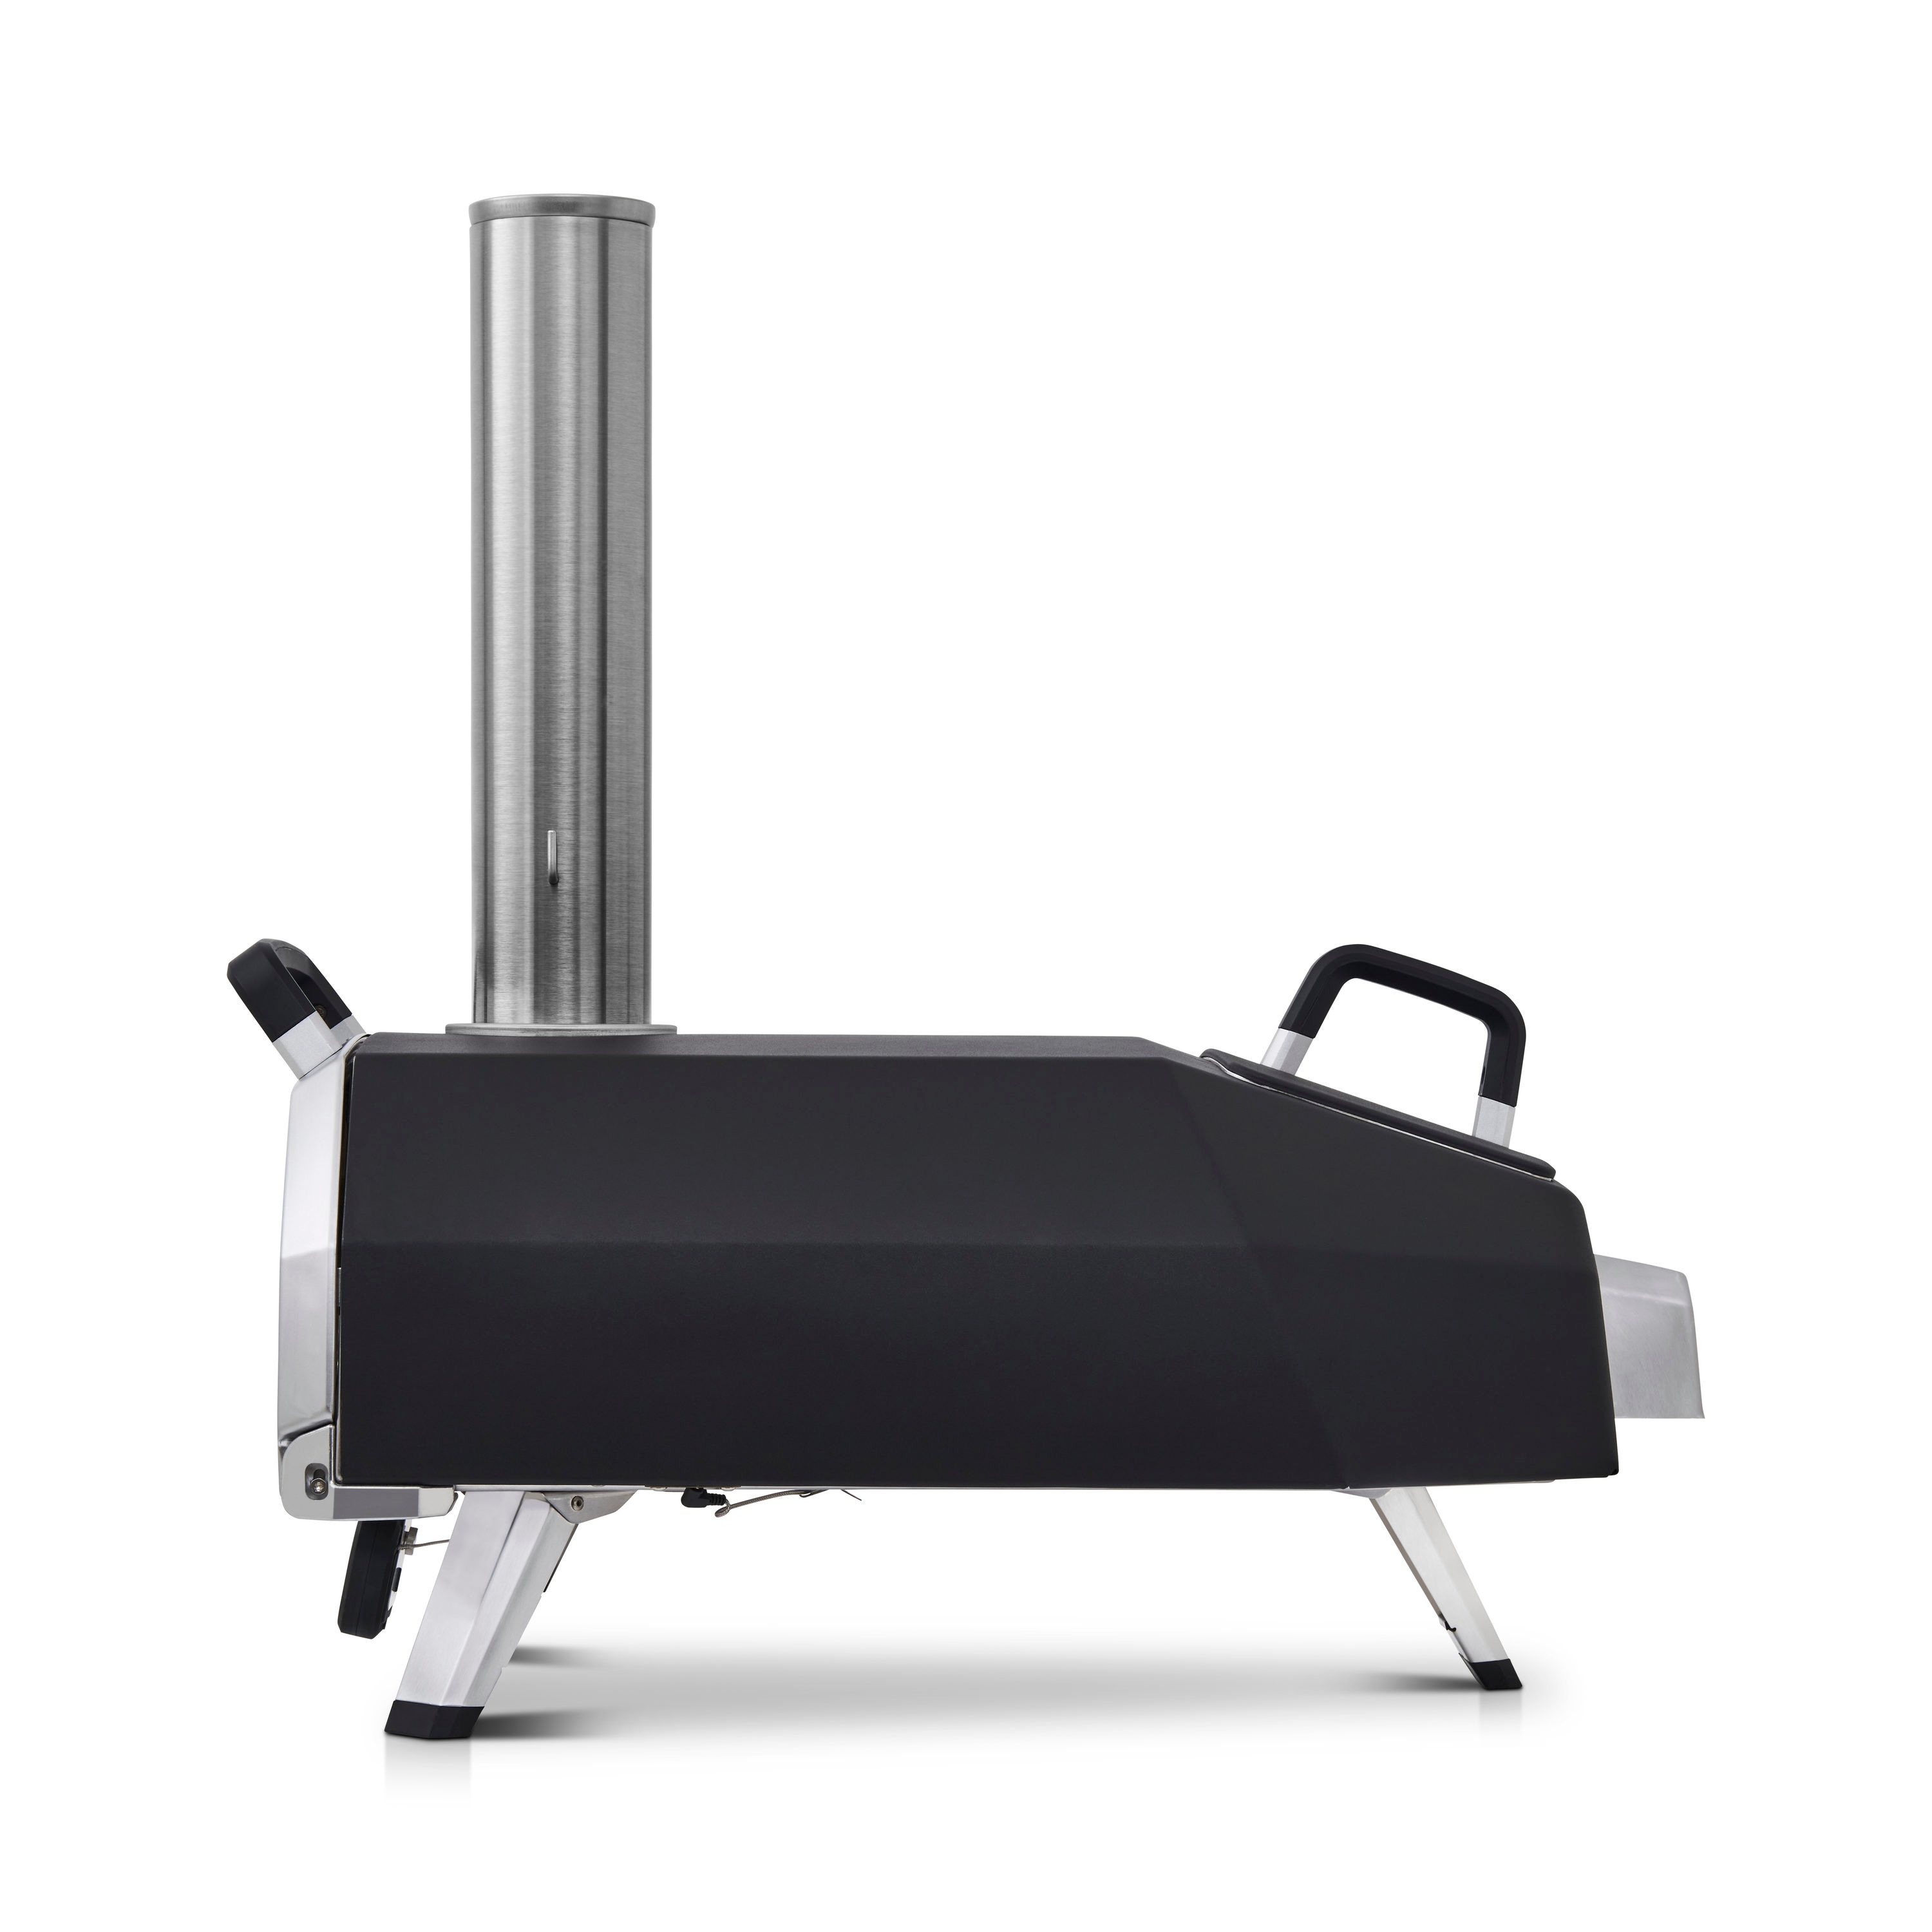 Ooni Karu 16 Insulated Steel Hearth Wood-fired Outdoor Pizza Oven